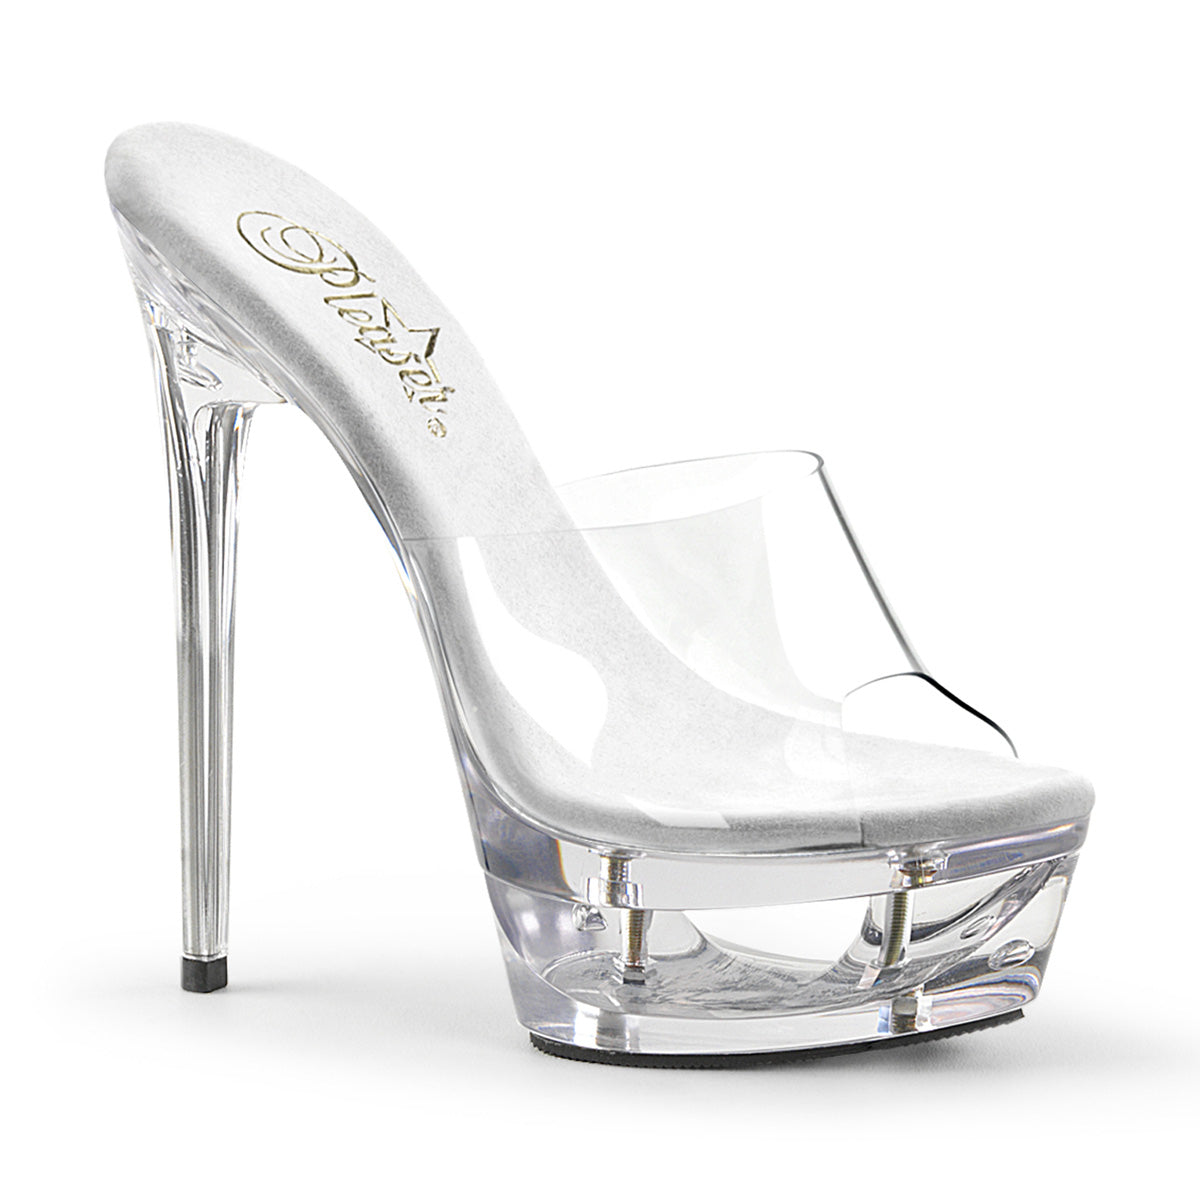 ECLIPSE-601 Pleaser 6.5" Heel Clear Pole Dancing Platforms-Pleaser- Sexy Shoes